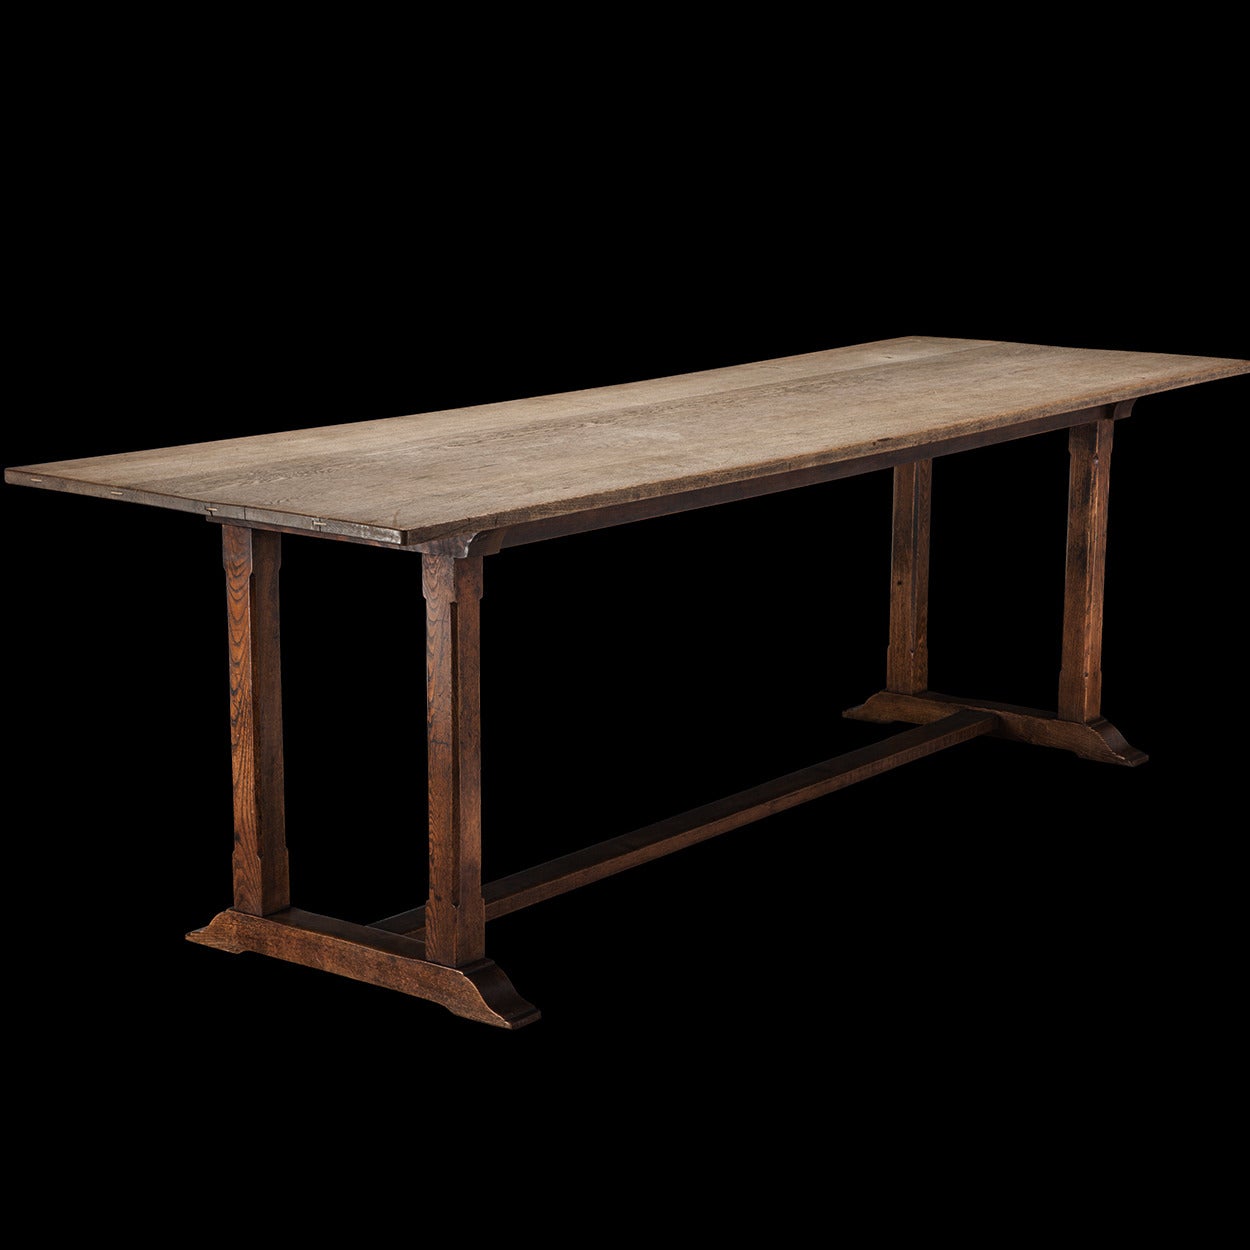 Solid oak table with low stretcher and twin pillar supports.

Made by Heals of London circa 1920.